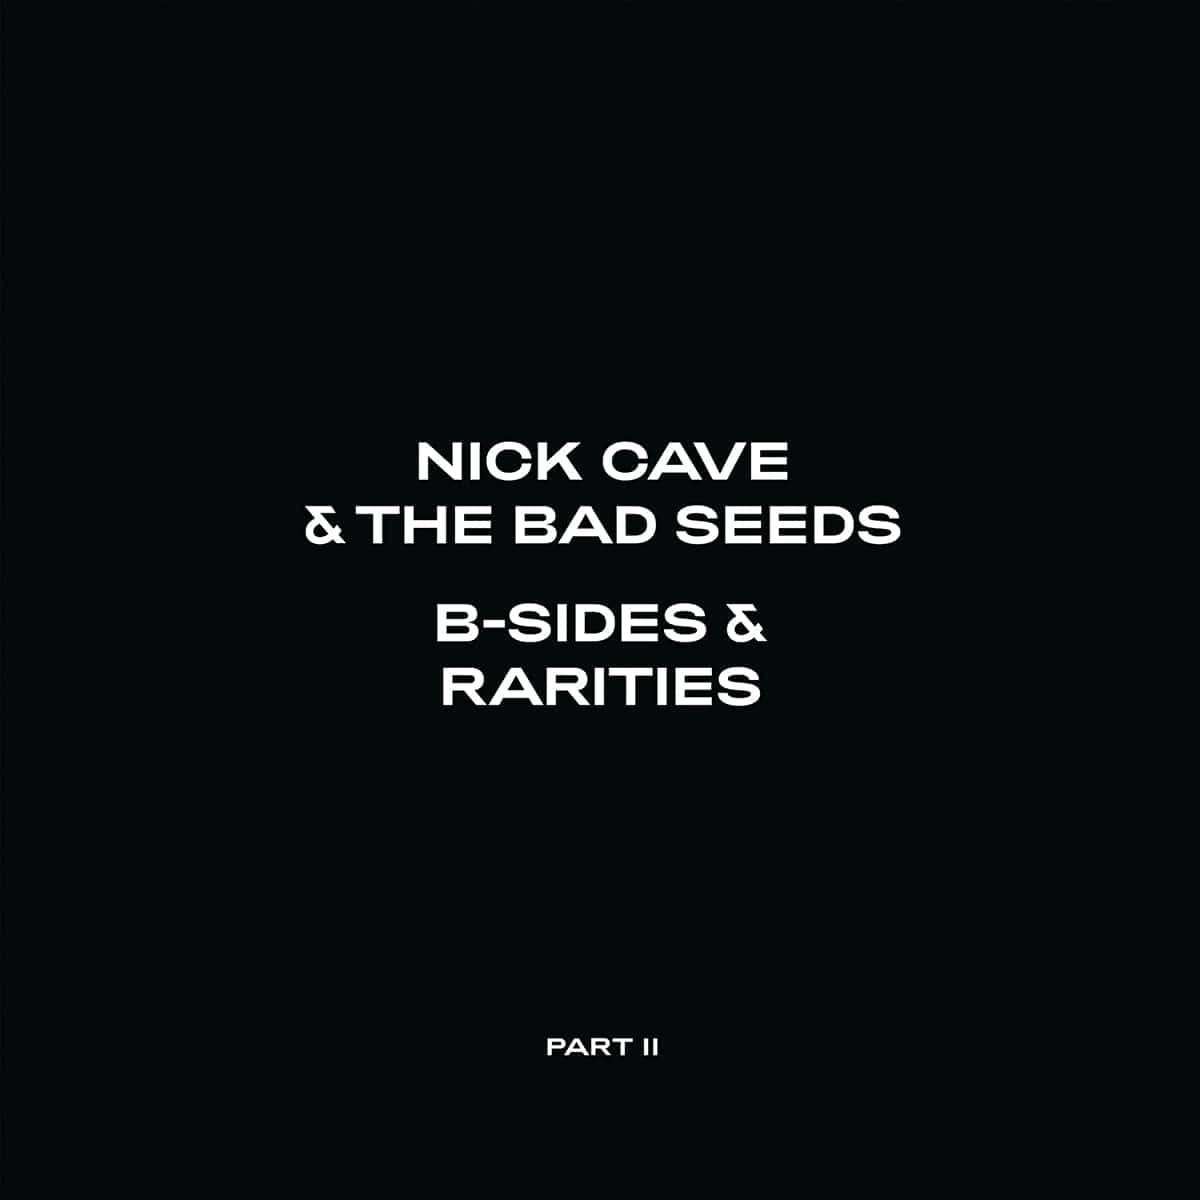 B-sides & Rarities: Part II:   - Nick Cave and the Bad Seeds [2LP VINYL]